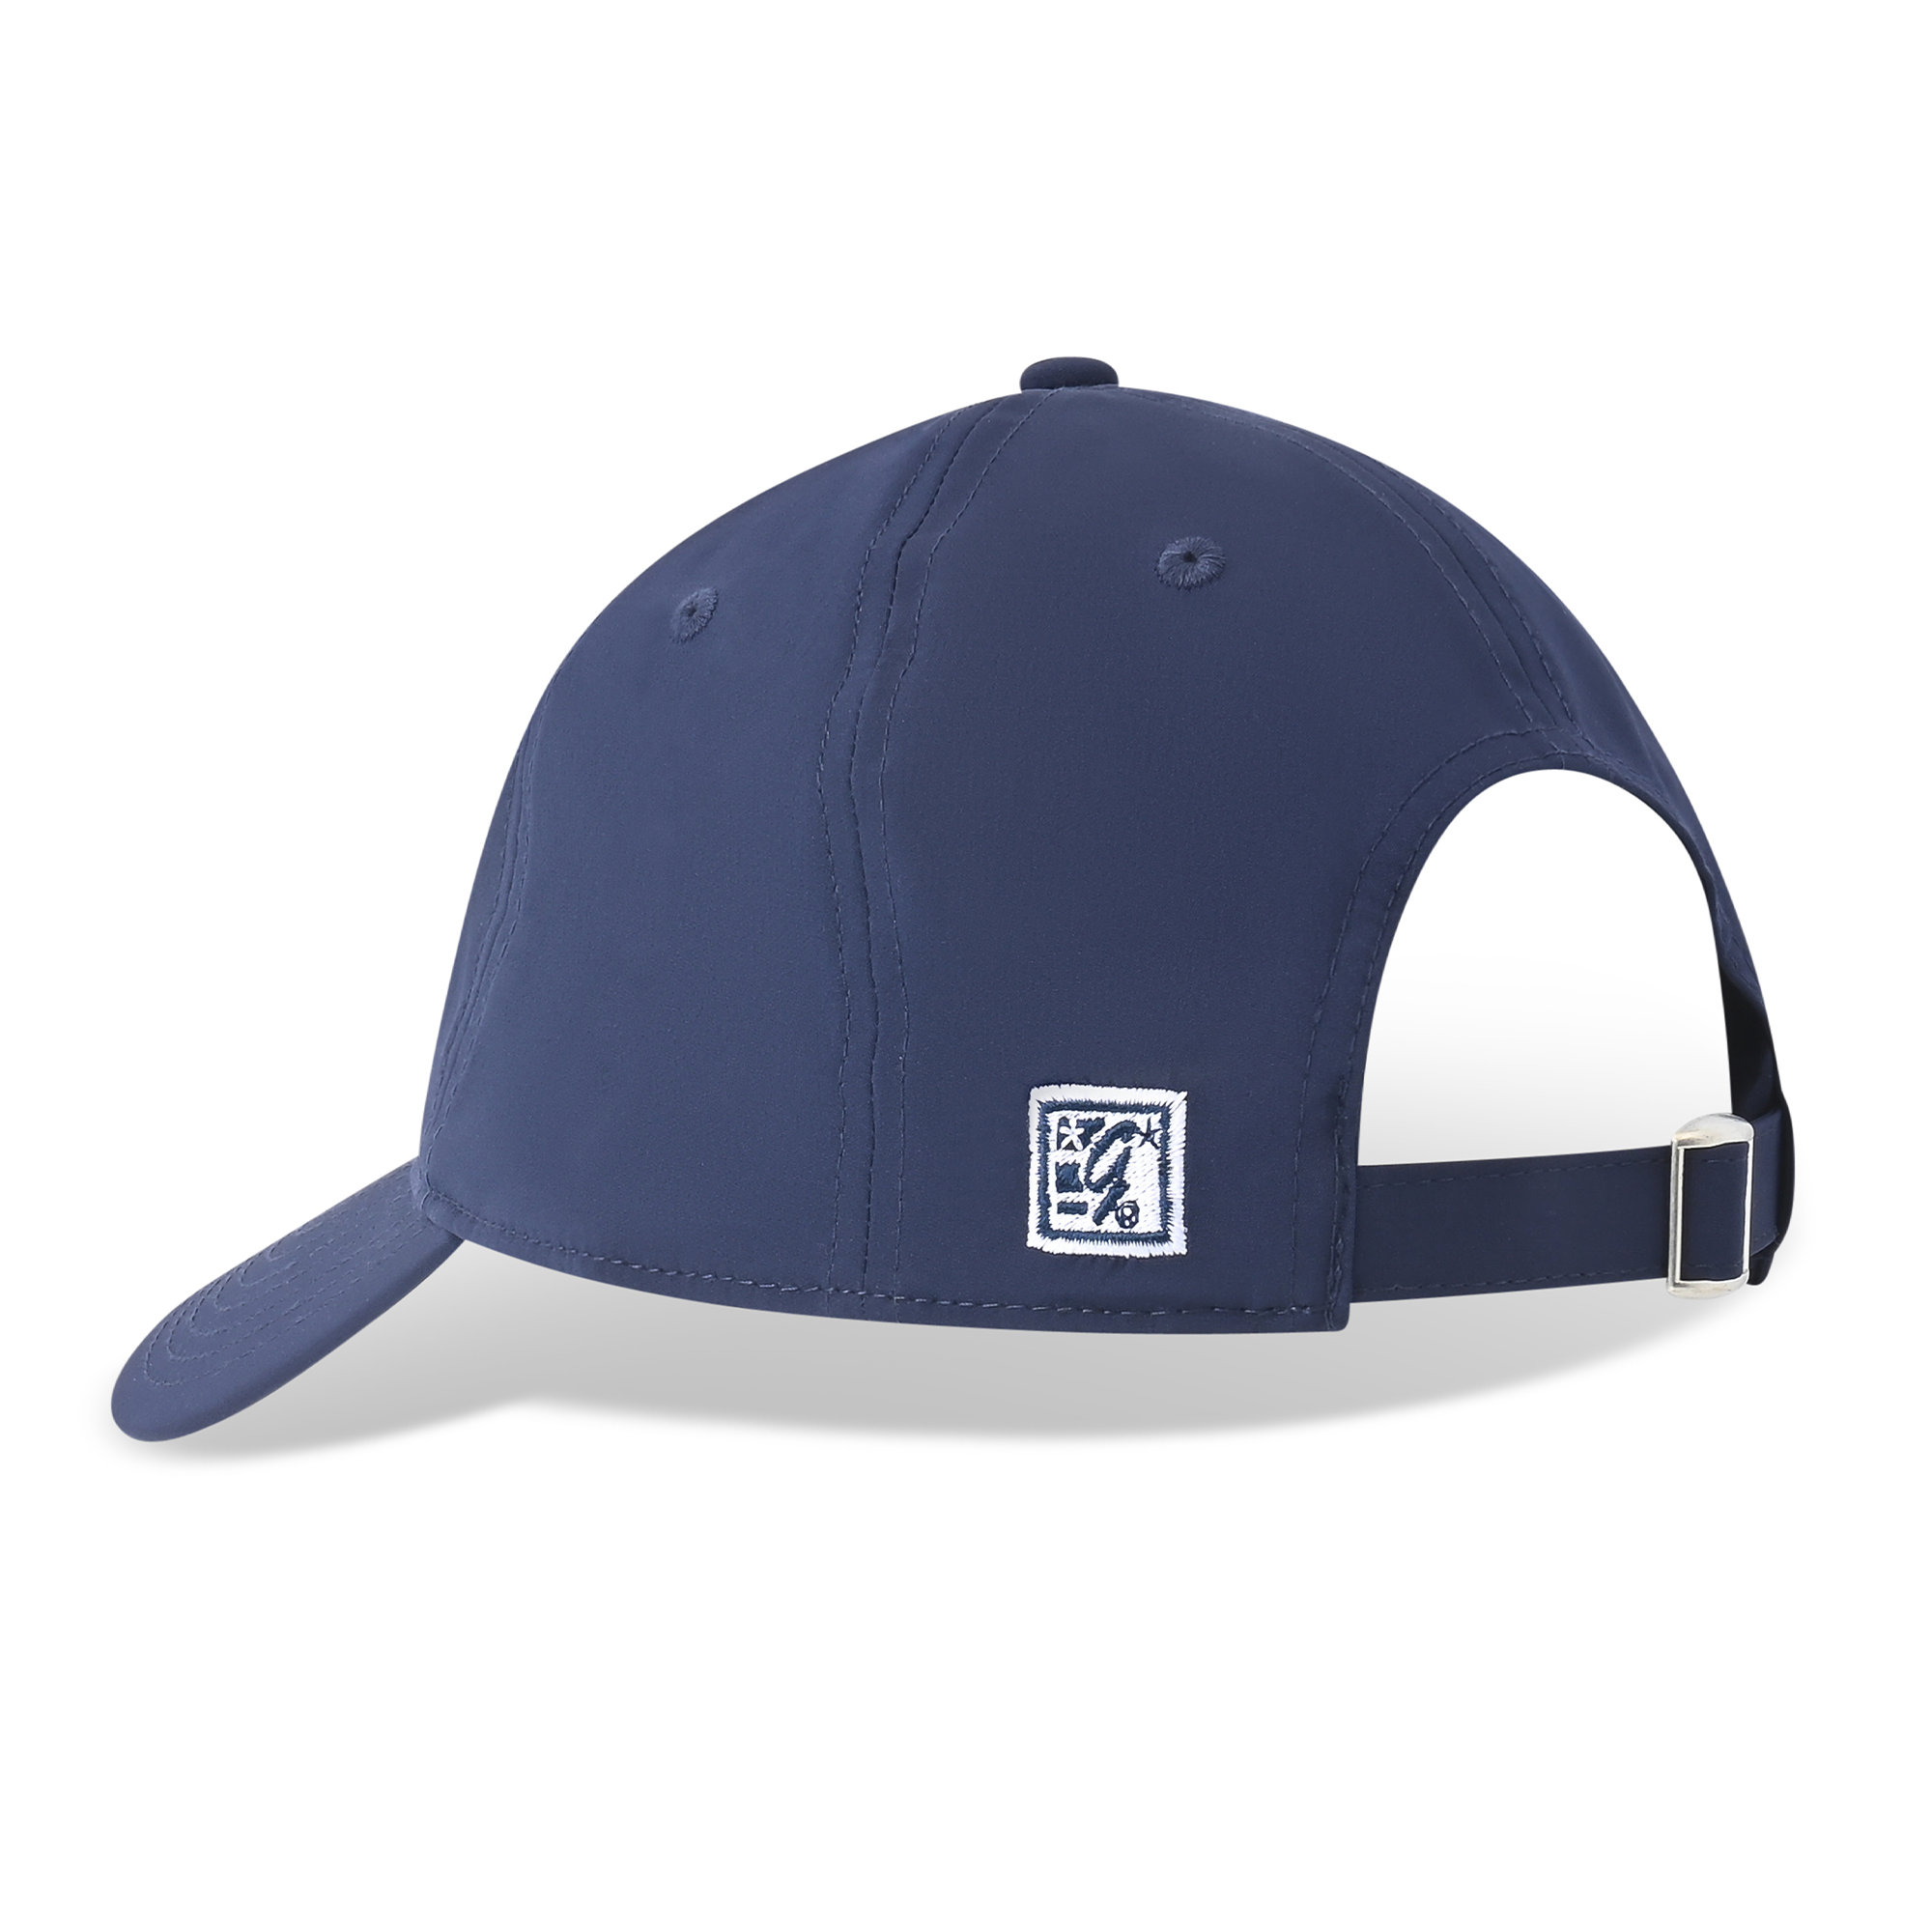 Limited Edition 150th Wake Navy Performance Cap